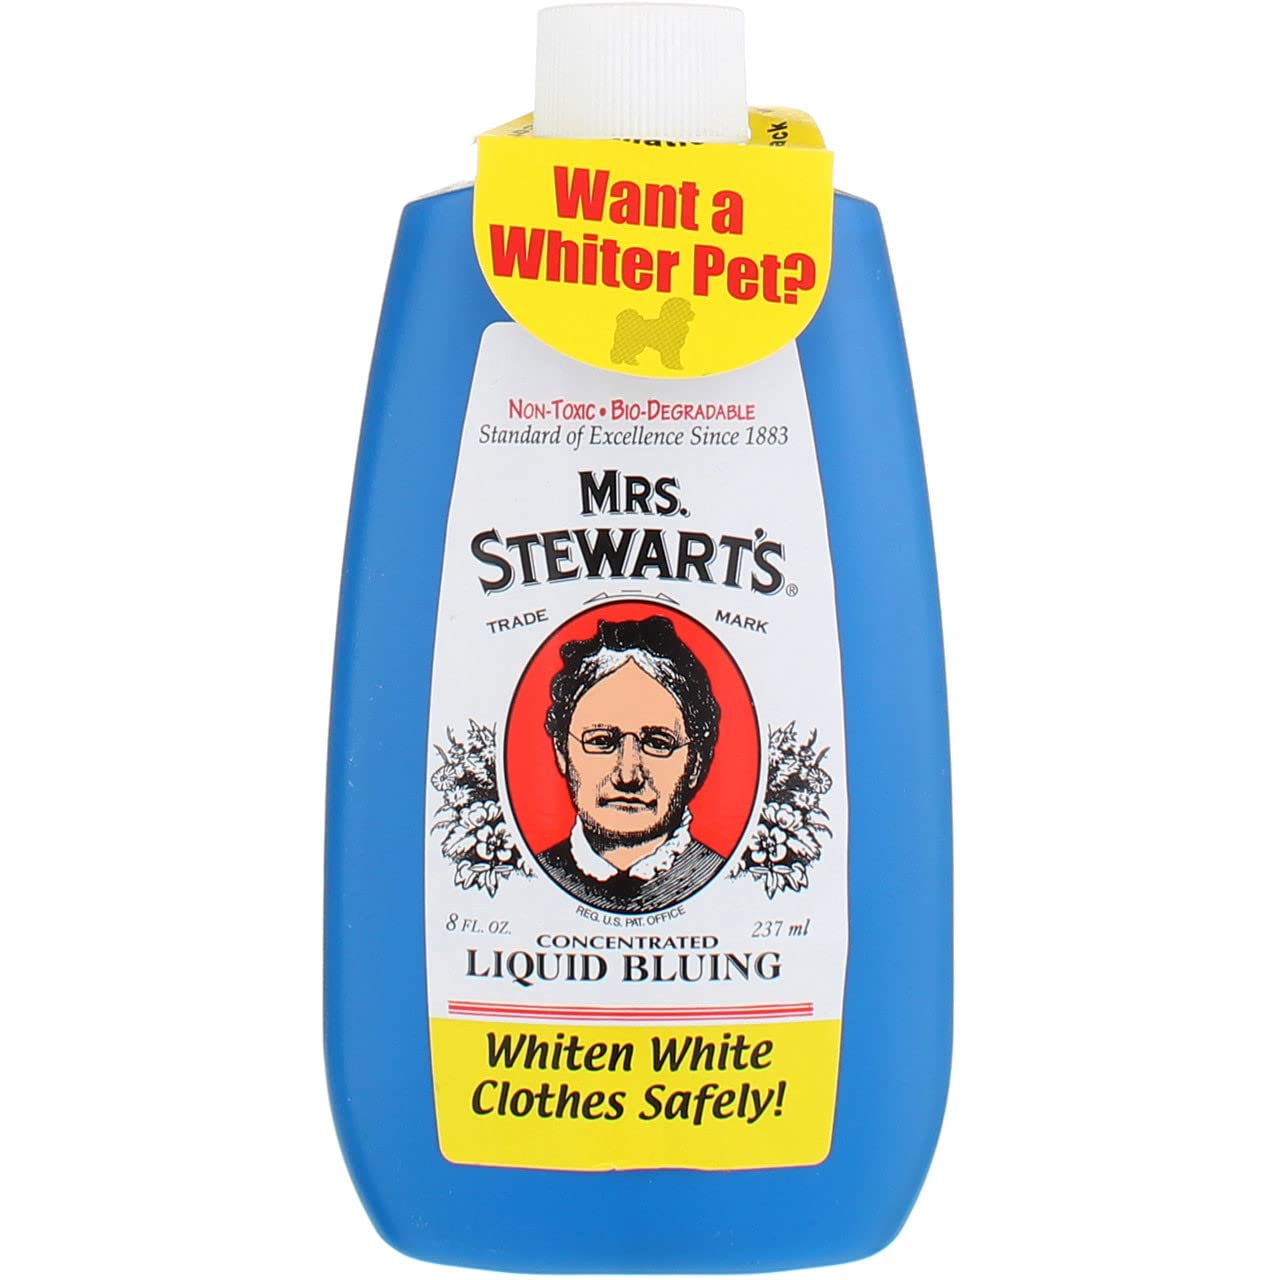 (Pack of 6) Mrs. Stewart's Concentrated Liquid Bluing, 8 fl oz Each, Bio-degradable